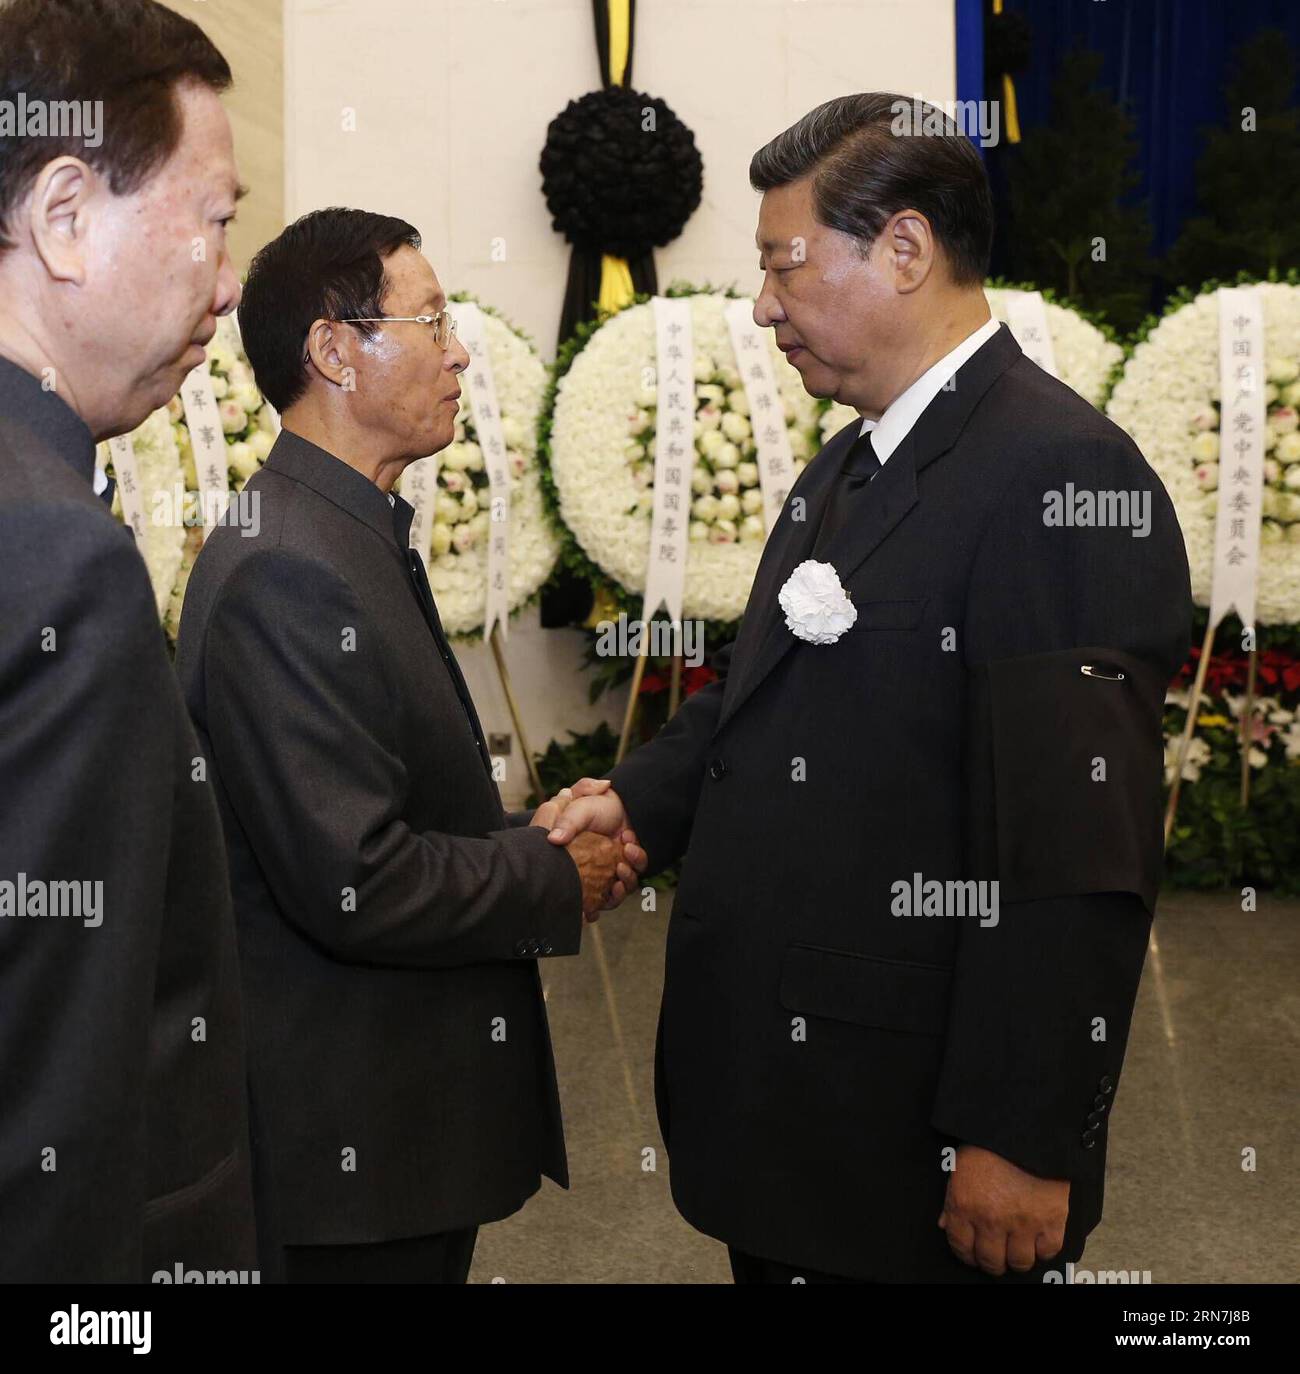 (150909) -- BEIJING, Sept. 9, 2015 -- Chinese President Xi Jinping (R, front) shakes hands with a family member of Zhang Zhen, former vice chairman of China s Central Military Commission, during Zhang s funeral at the Babaoshan Revolutionary Cemetery in Beijing, capital of China, Sept. 9, 2015. The body of Zhang Zhen was cremated Wednesday in Beijing. )(yxb) CHINA-BEIJING-ZHANG ZHEN-CREMATION (CN) JuxPeng PUBLICATIONxNOTxINxCHN   150909 Beijing Sept 9 2015 Chinese President Xi Jinping r Front Shakes Hands With a Family member of Zhang Zhen Former Vice Chairman of China S Central Military Commi Stock Photo